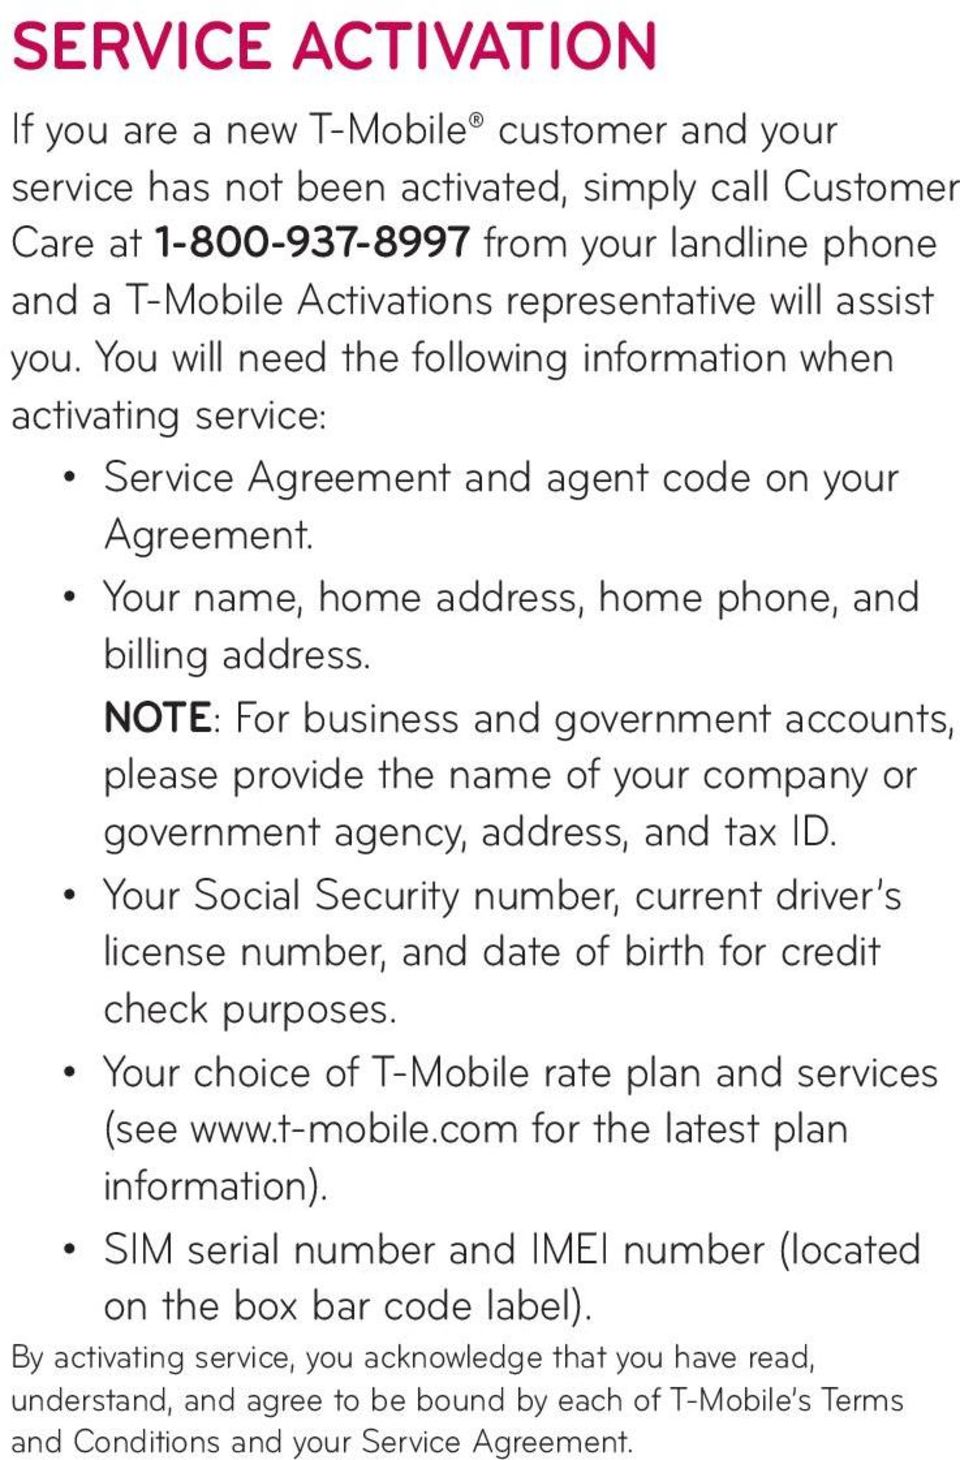 Your name, home address, home phone, and billing address. NOTE: For business and government accounts, please provide the name of your company or government agency, address, and tax ID.